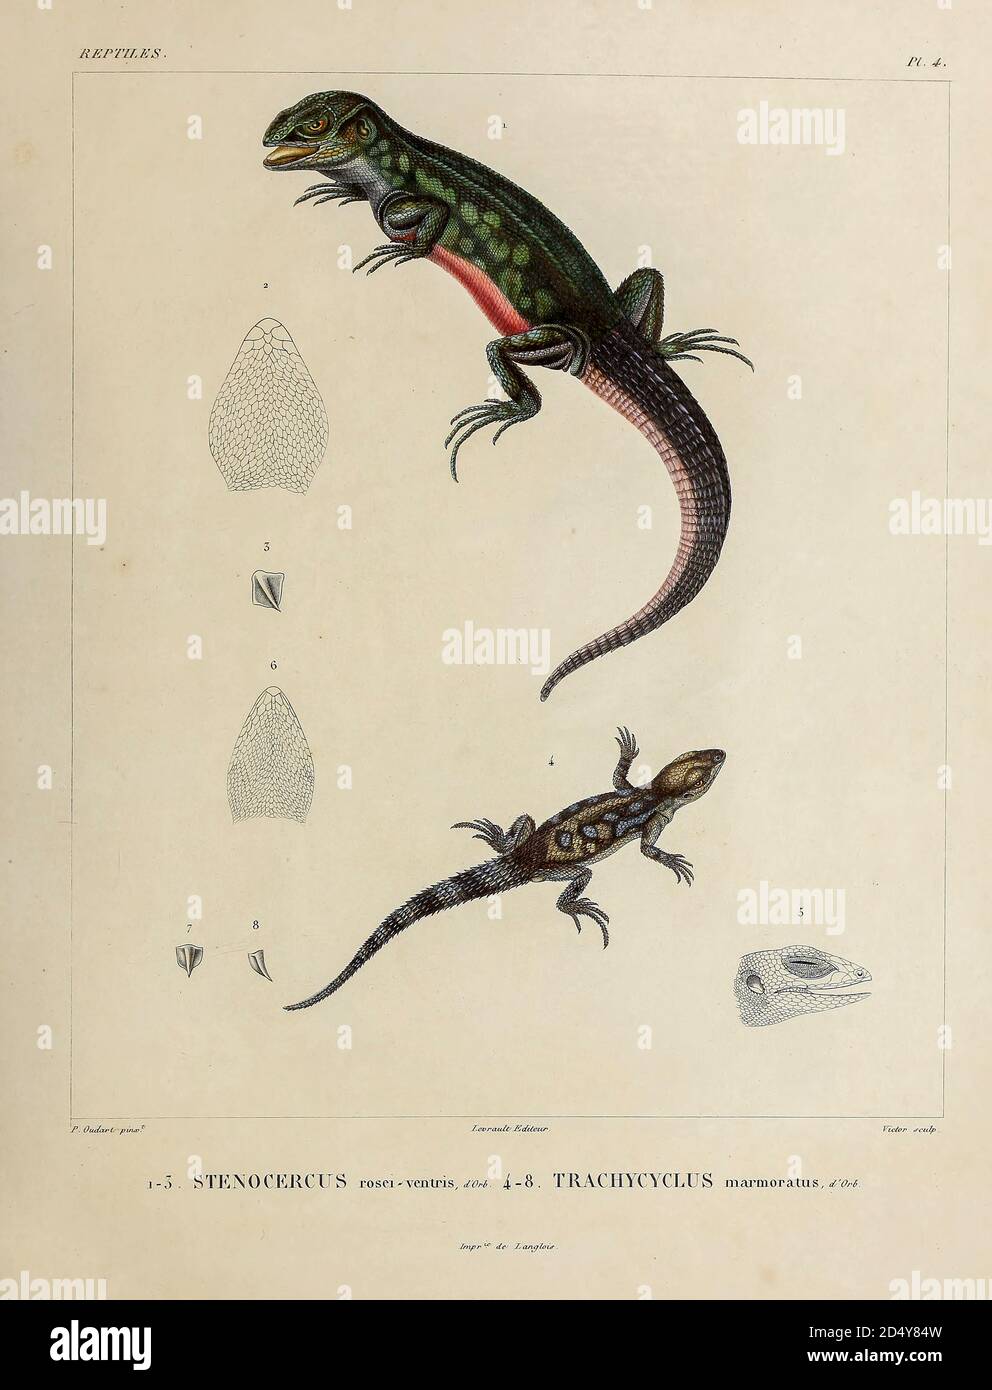 Stenocercus [Here as Stenocercus rosei-ventris] is a genus of South American lizards, commonly called whorltail iguanas, (Top) and Stenocercus marmoratus [Here as Trachycyclus marmoratus] hand coloured sketch From the book 'Voyage dans l'Amérique Méridionale' [Journey to South America: (Brazil, the eastern republic of Uruguay, the Argentine Republic, Patagonia, the republic of Chile, the republic of Bolivia, the republic of Peru), executed during the years 1826 - 1833] Volume 5 Part 1 By: Orbigny, Alcide Dessalines d', d'Orbigny, 1802-1857; Montagne, Jean François Camille, 1784-1866; Martius, Stock Photo